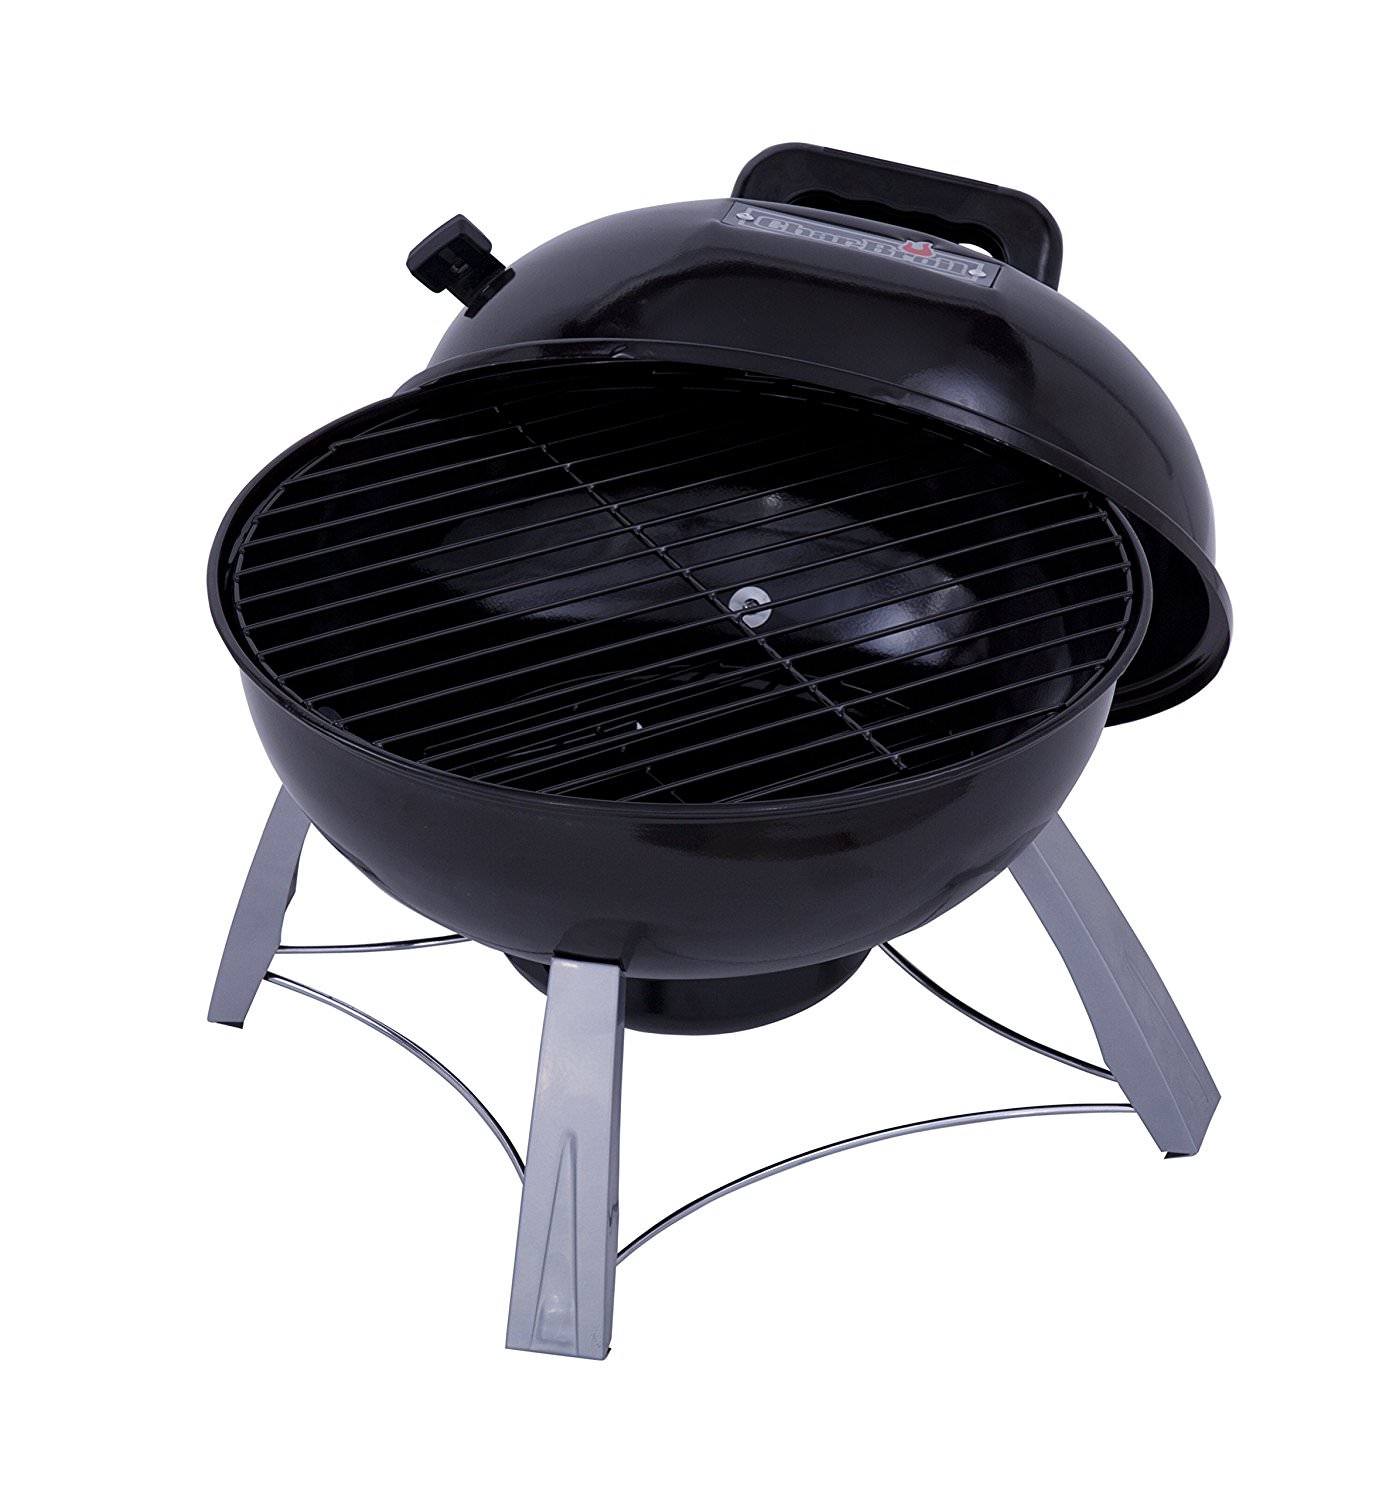 Char-Broil 150 Portable Tabletop Kettle Charcoal Grill - image 3 of 8